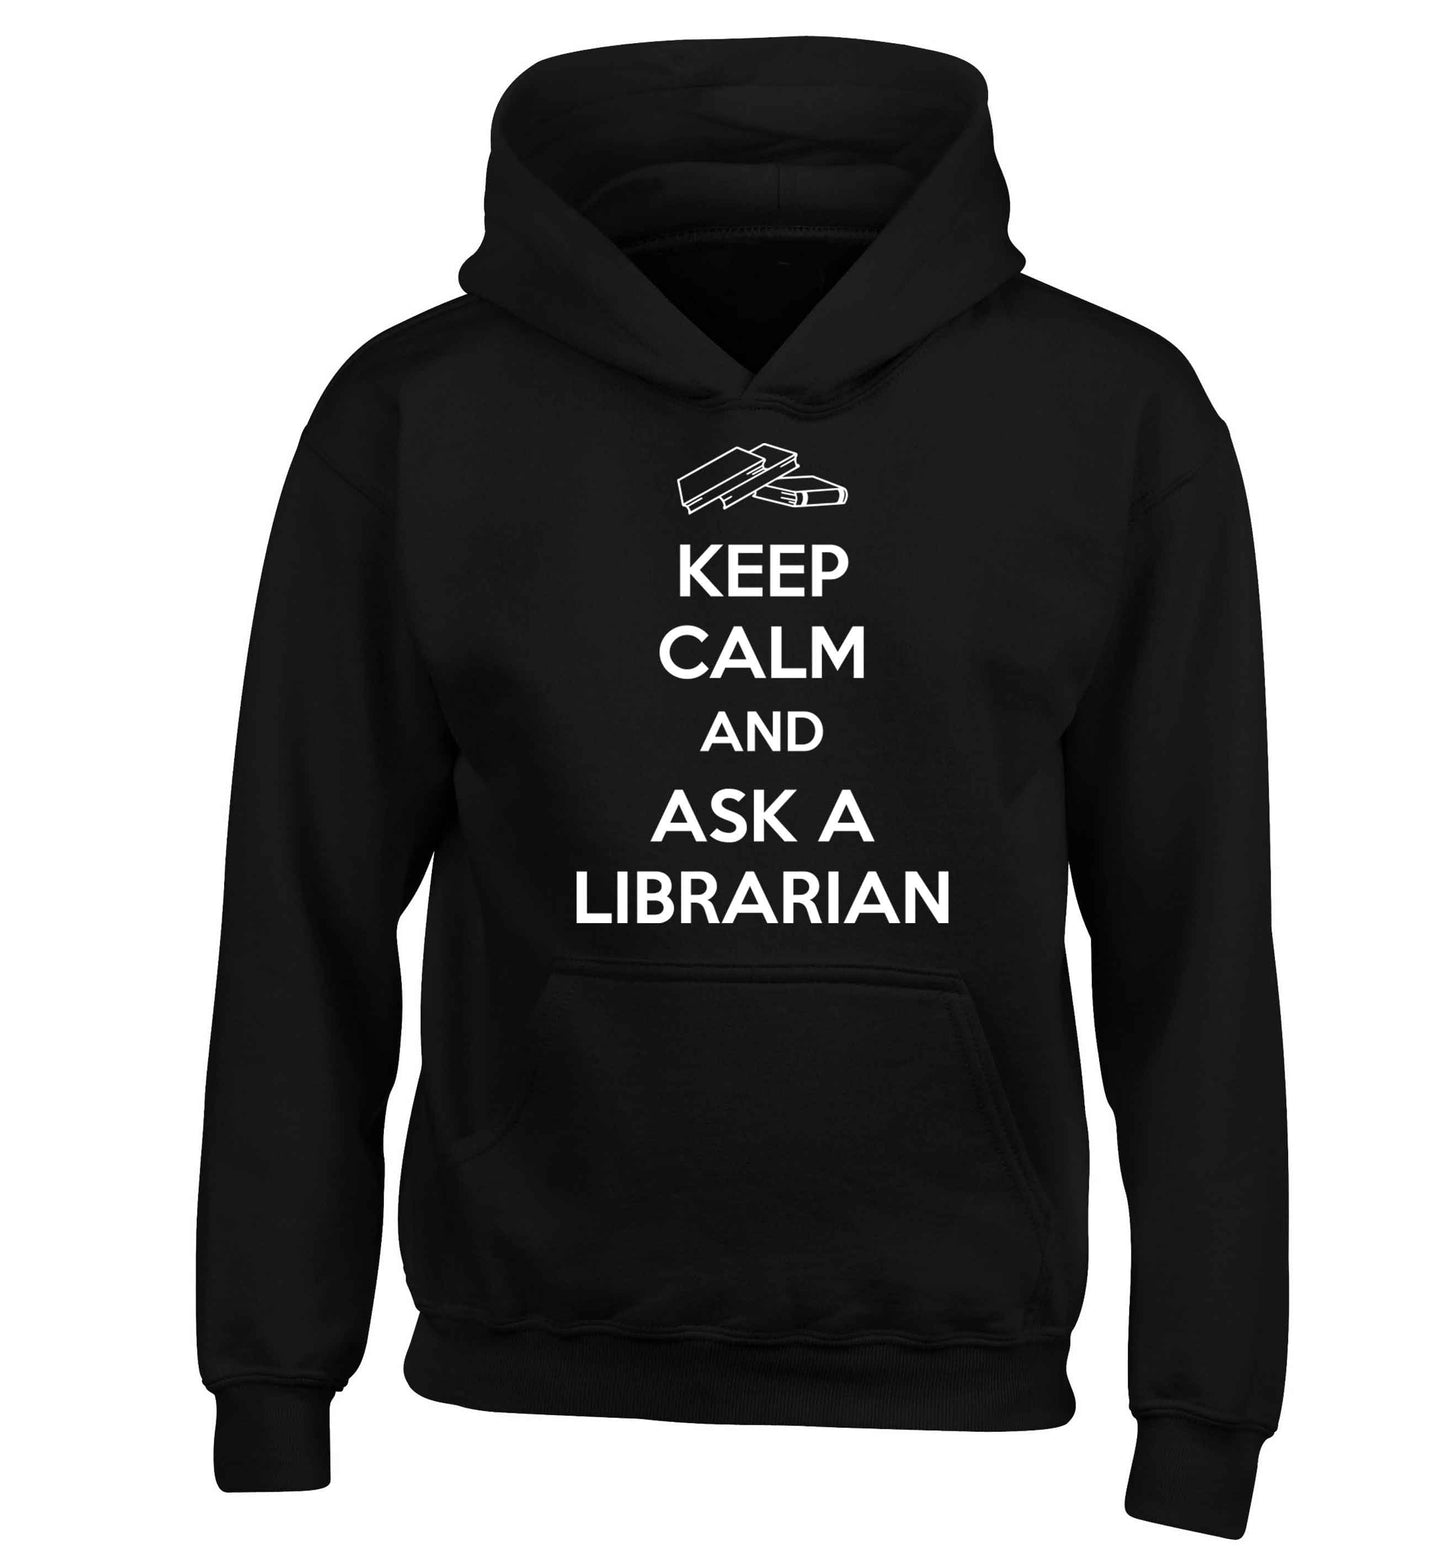 Keep calm and ask a librarian children's black hoodie 12-13 Years